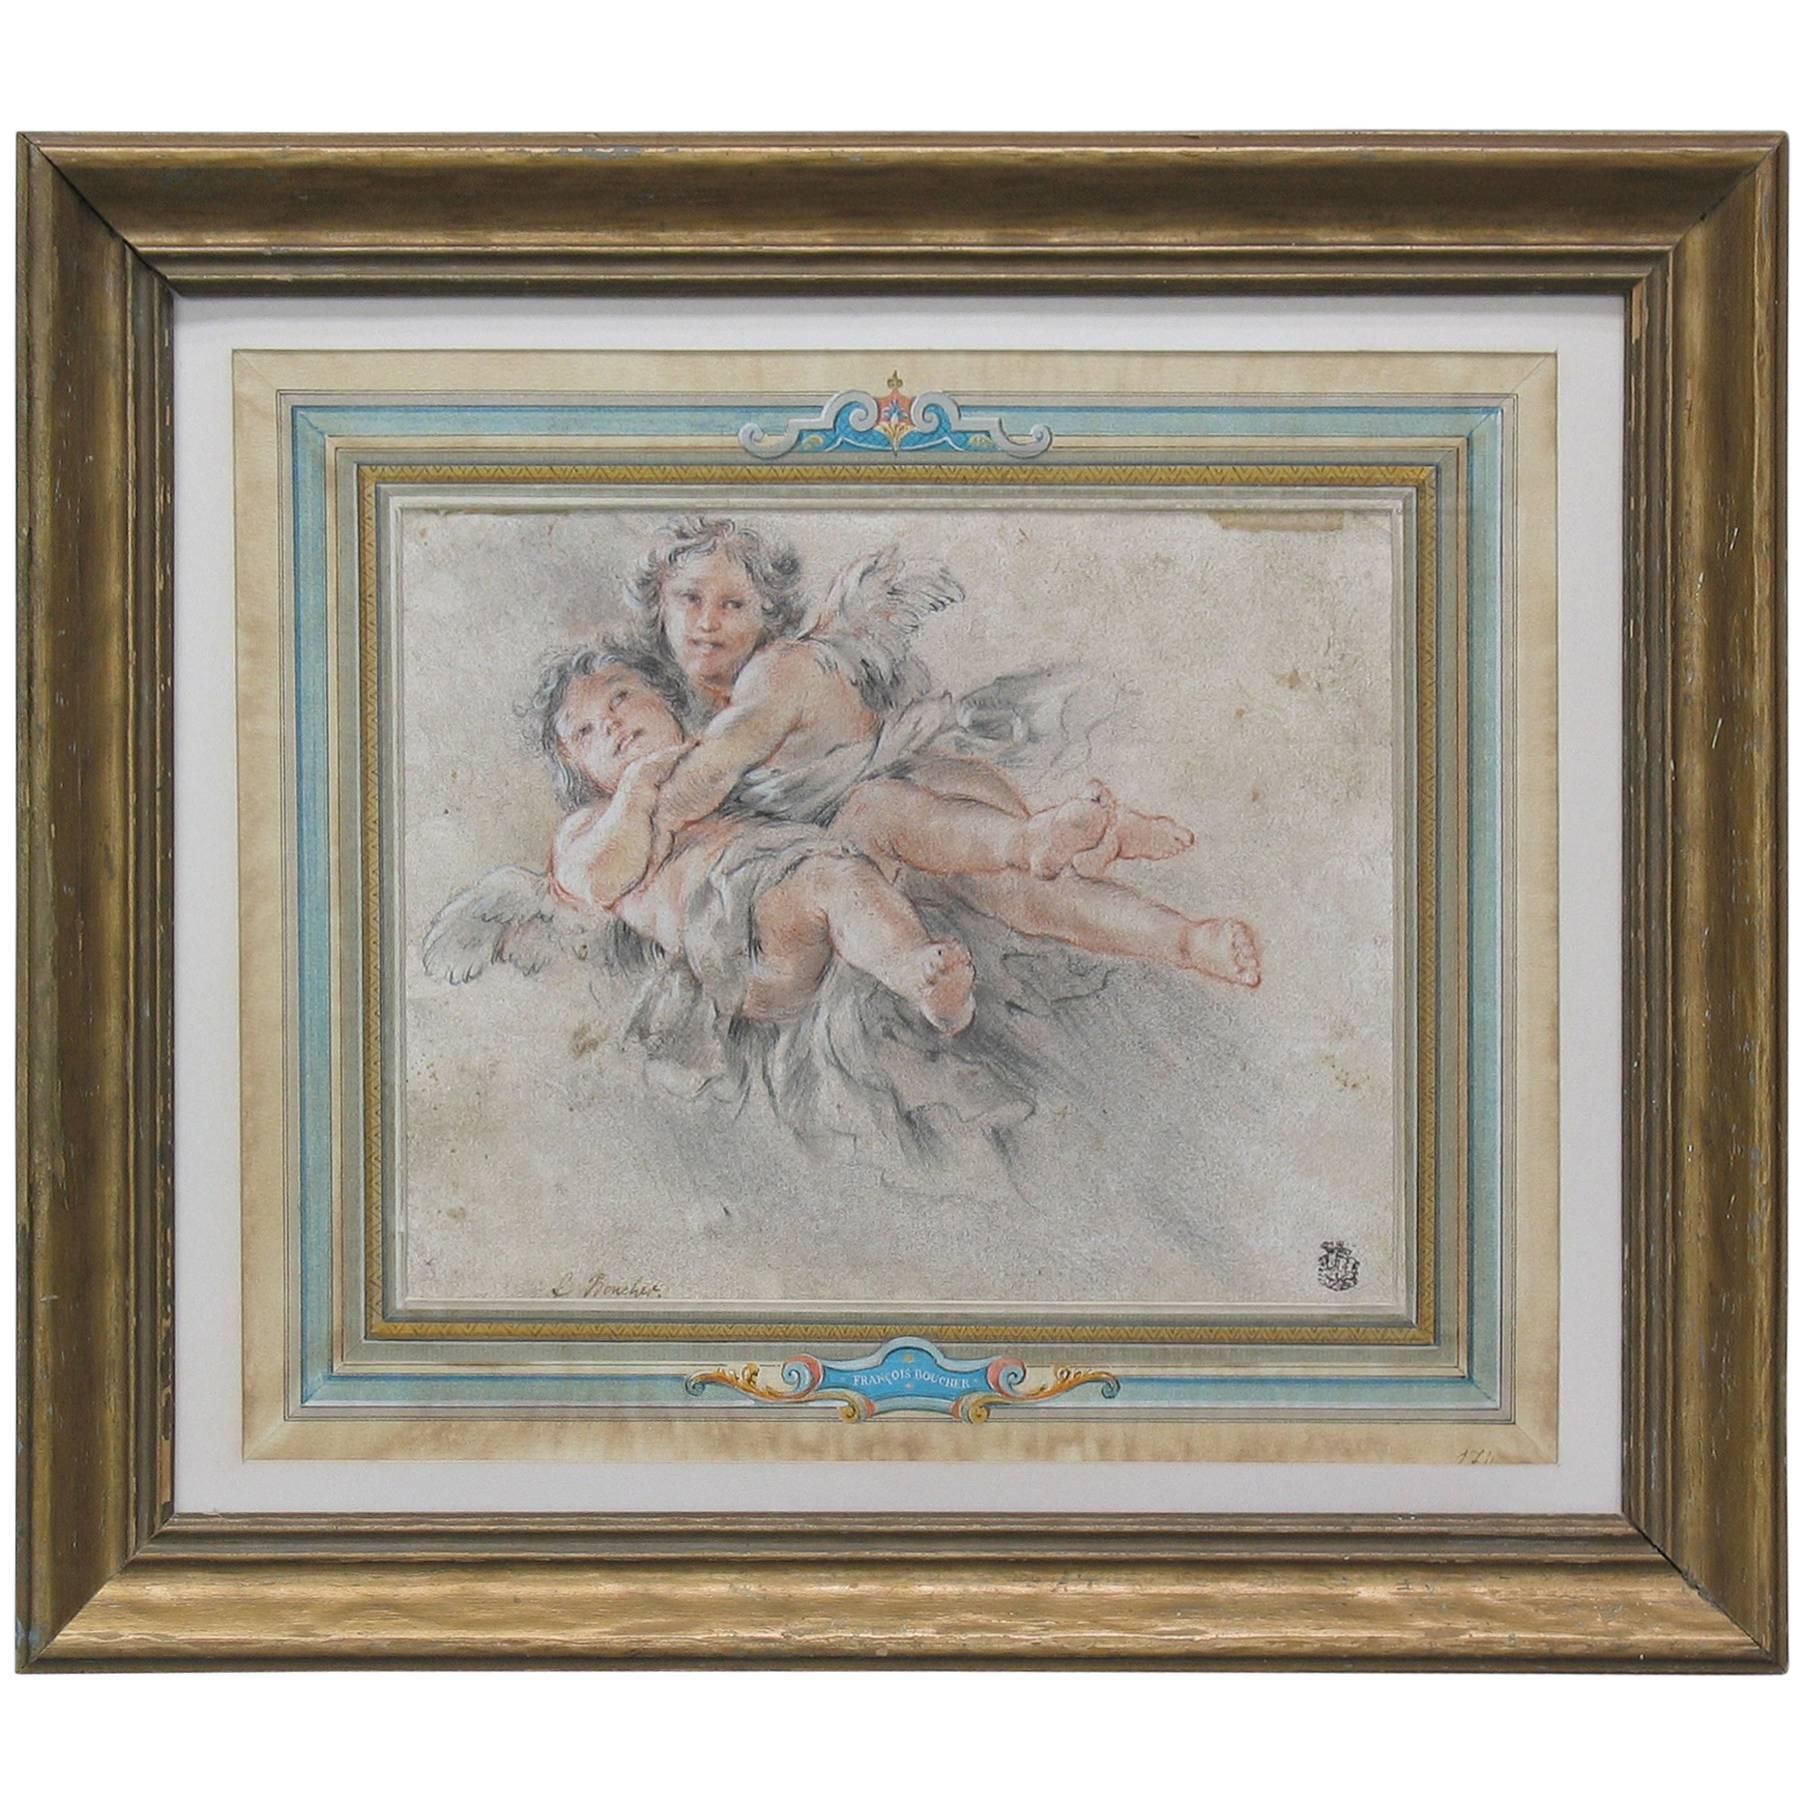 Two Putti's in Flight Attributed to Francois Boucher